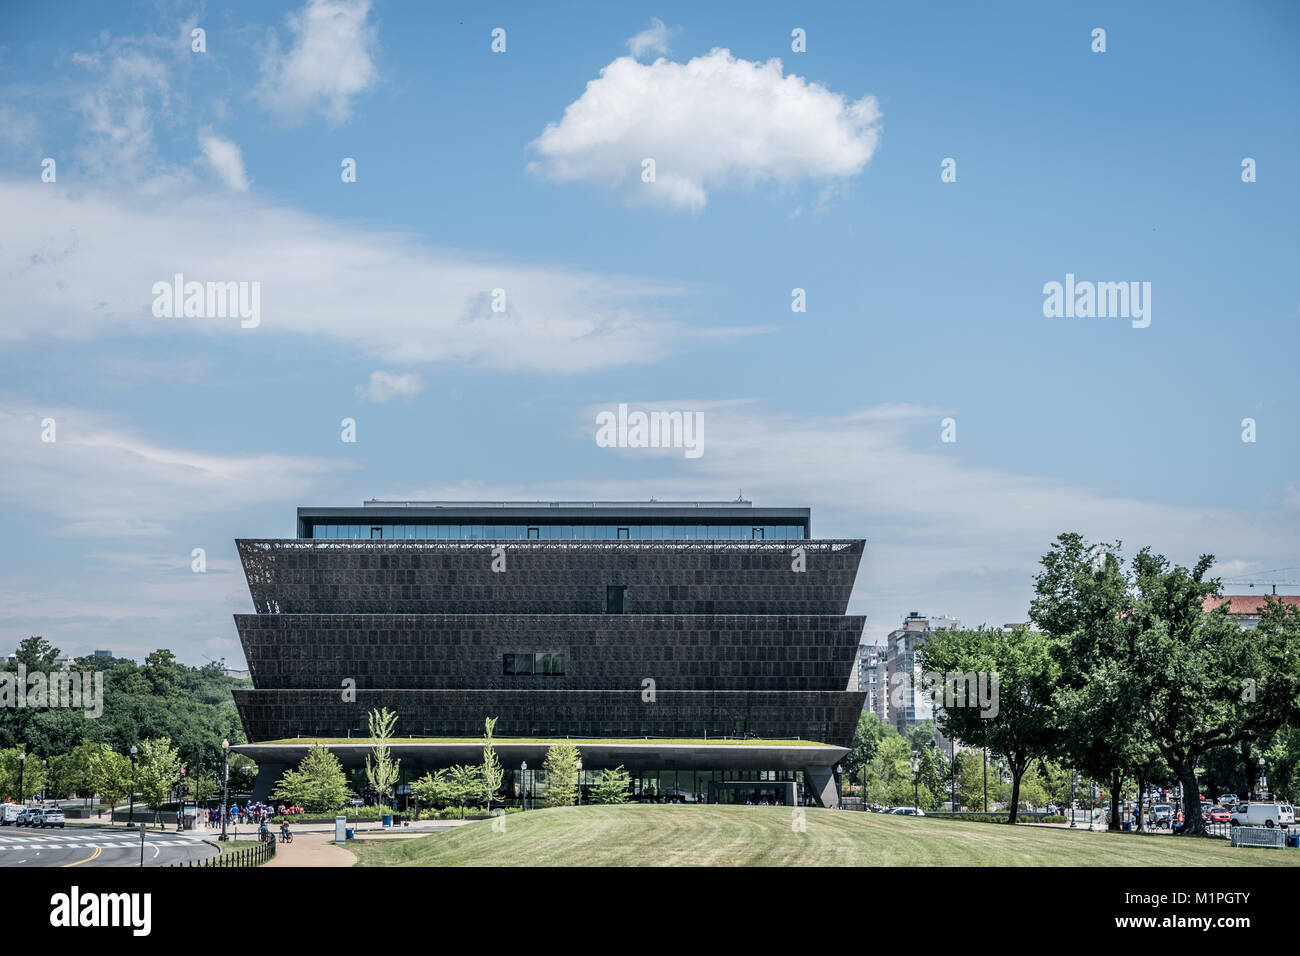 Washington, D.C., United States - June 21, 2017: The building of the National Museum of African American History and Culture. Stock Photo